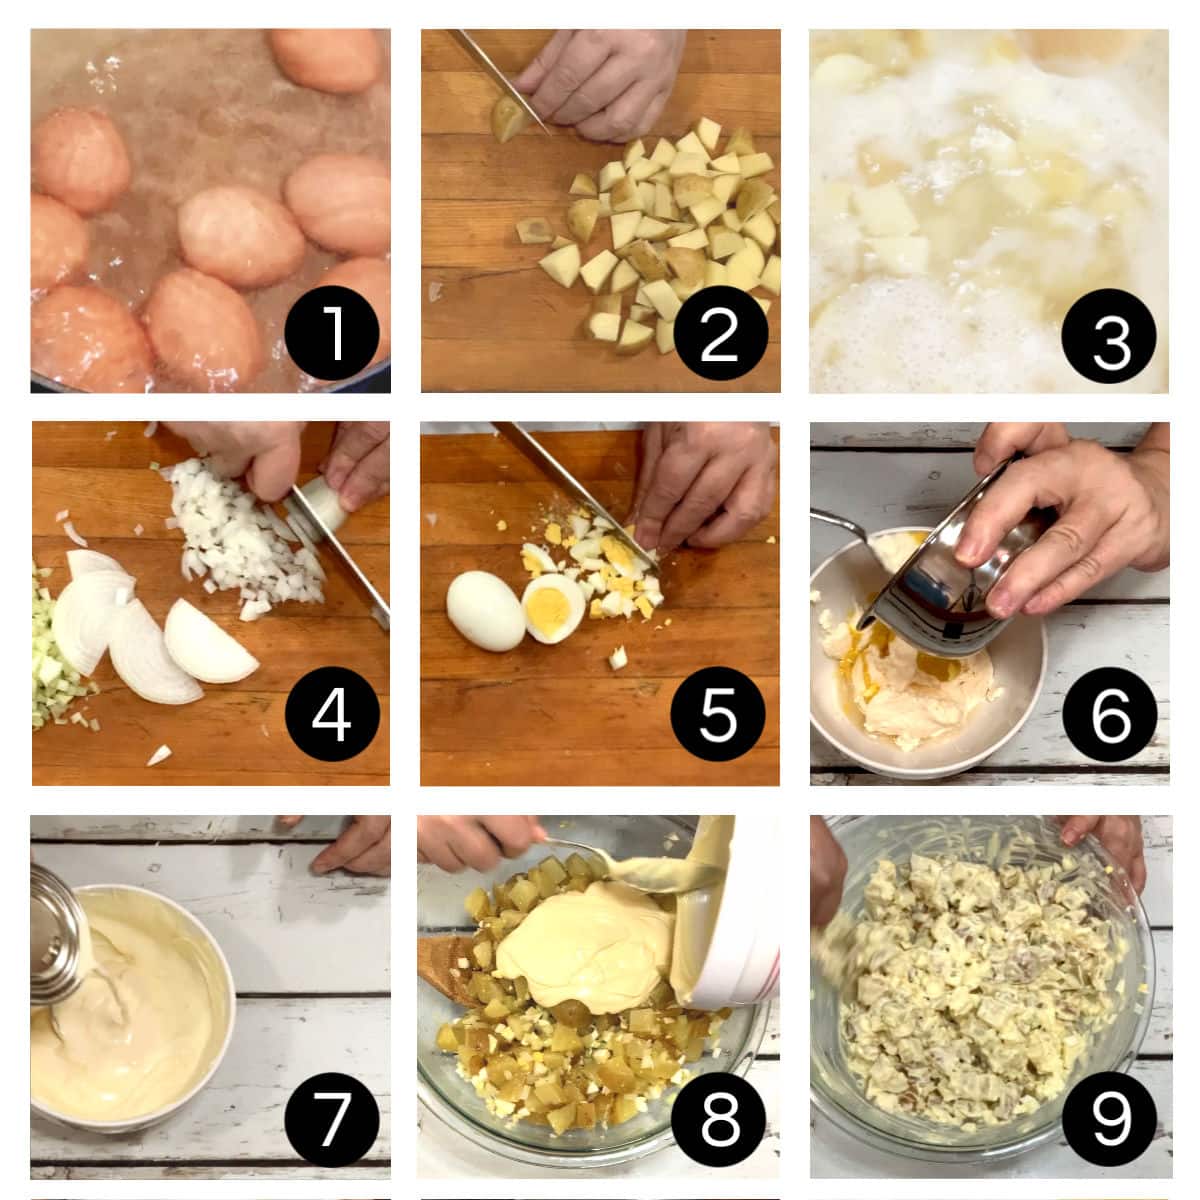 Step by step images for making potato salad.